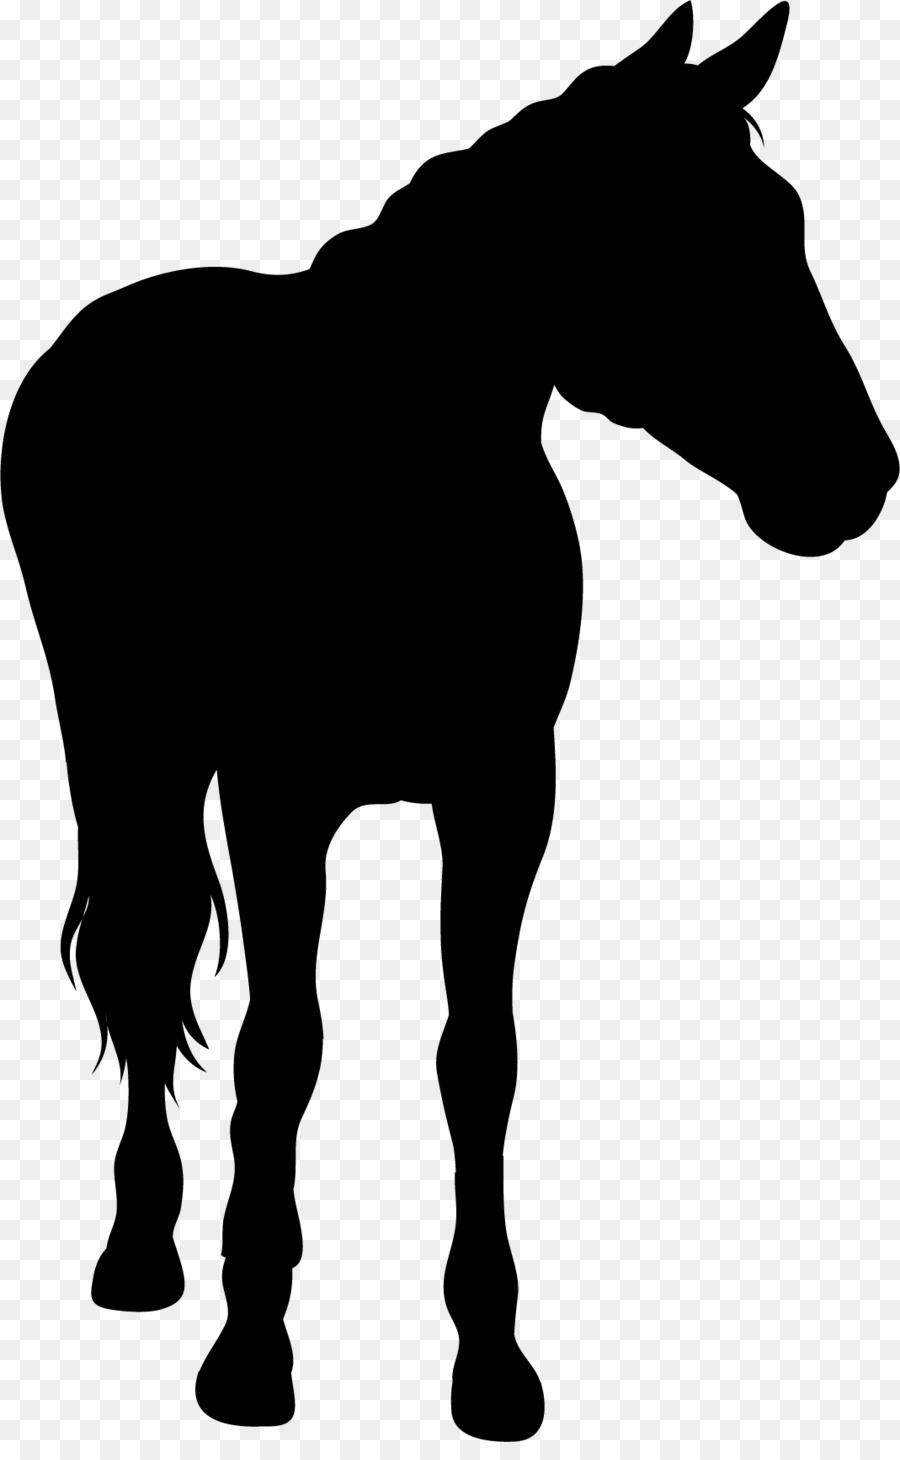 Horse Silhouette - A horse silhouette png download - 1069*1713 - Free Transparent Horse png Download.